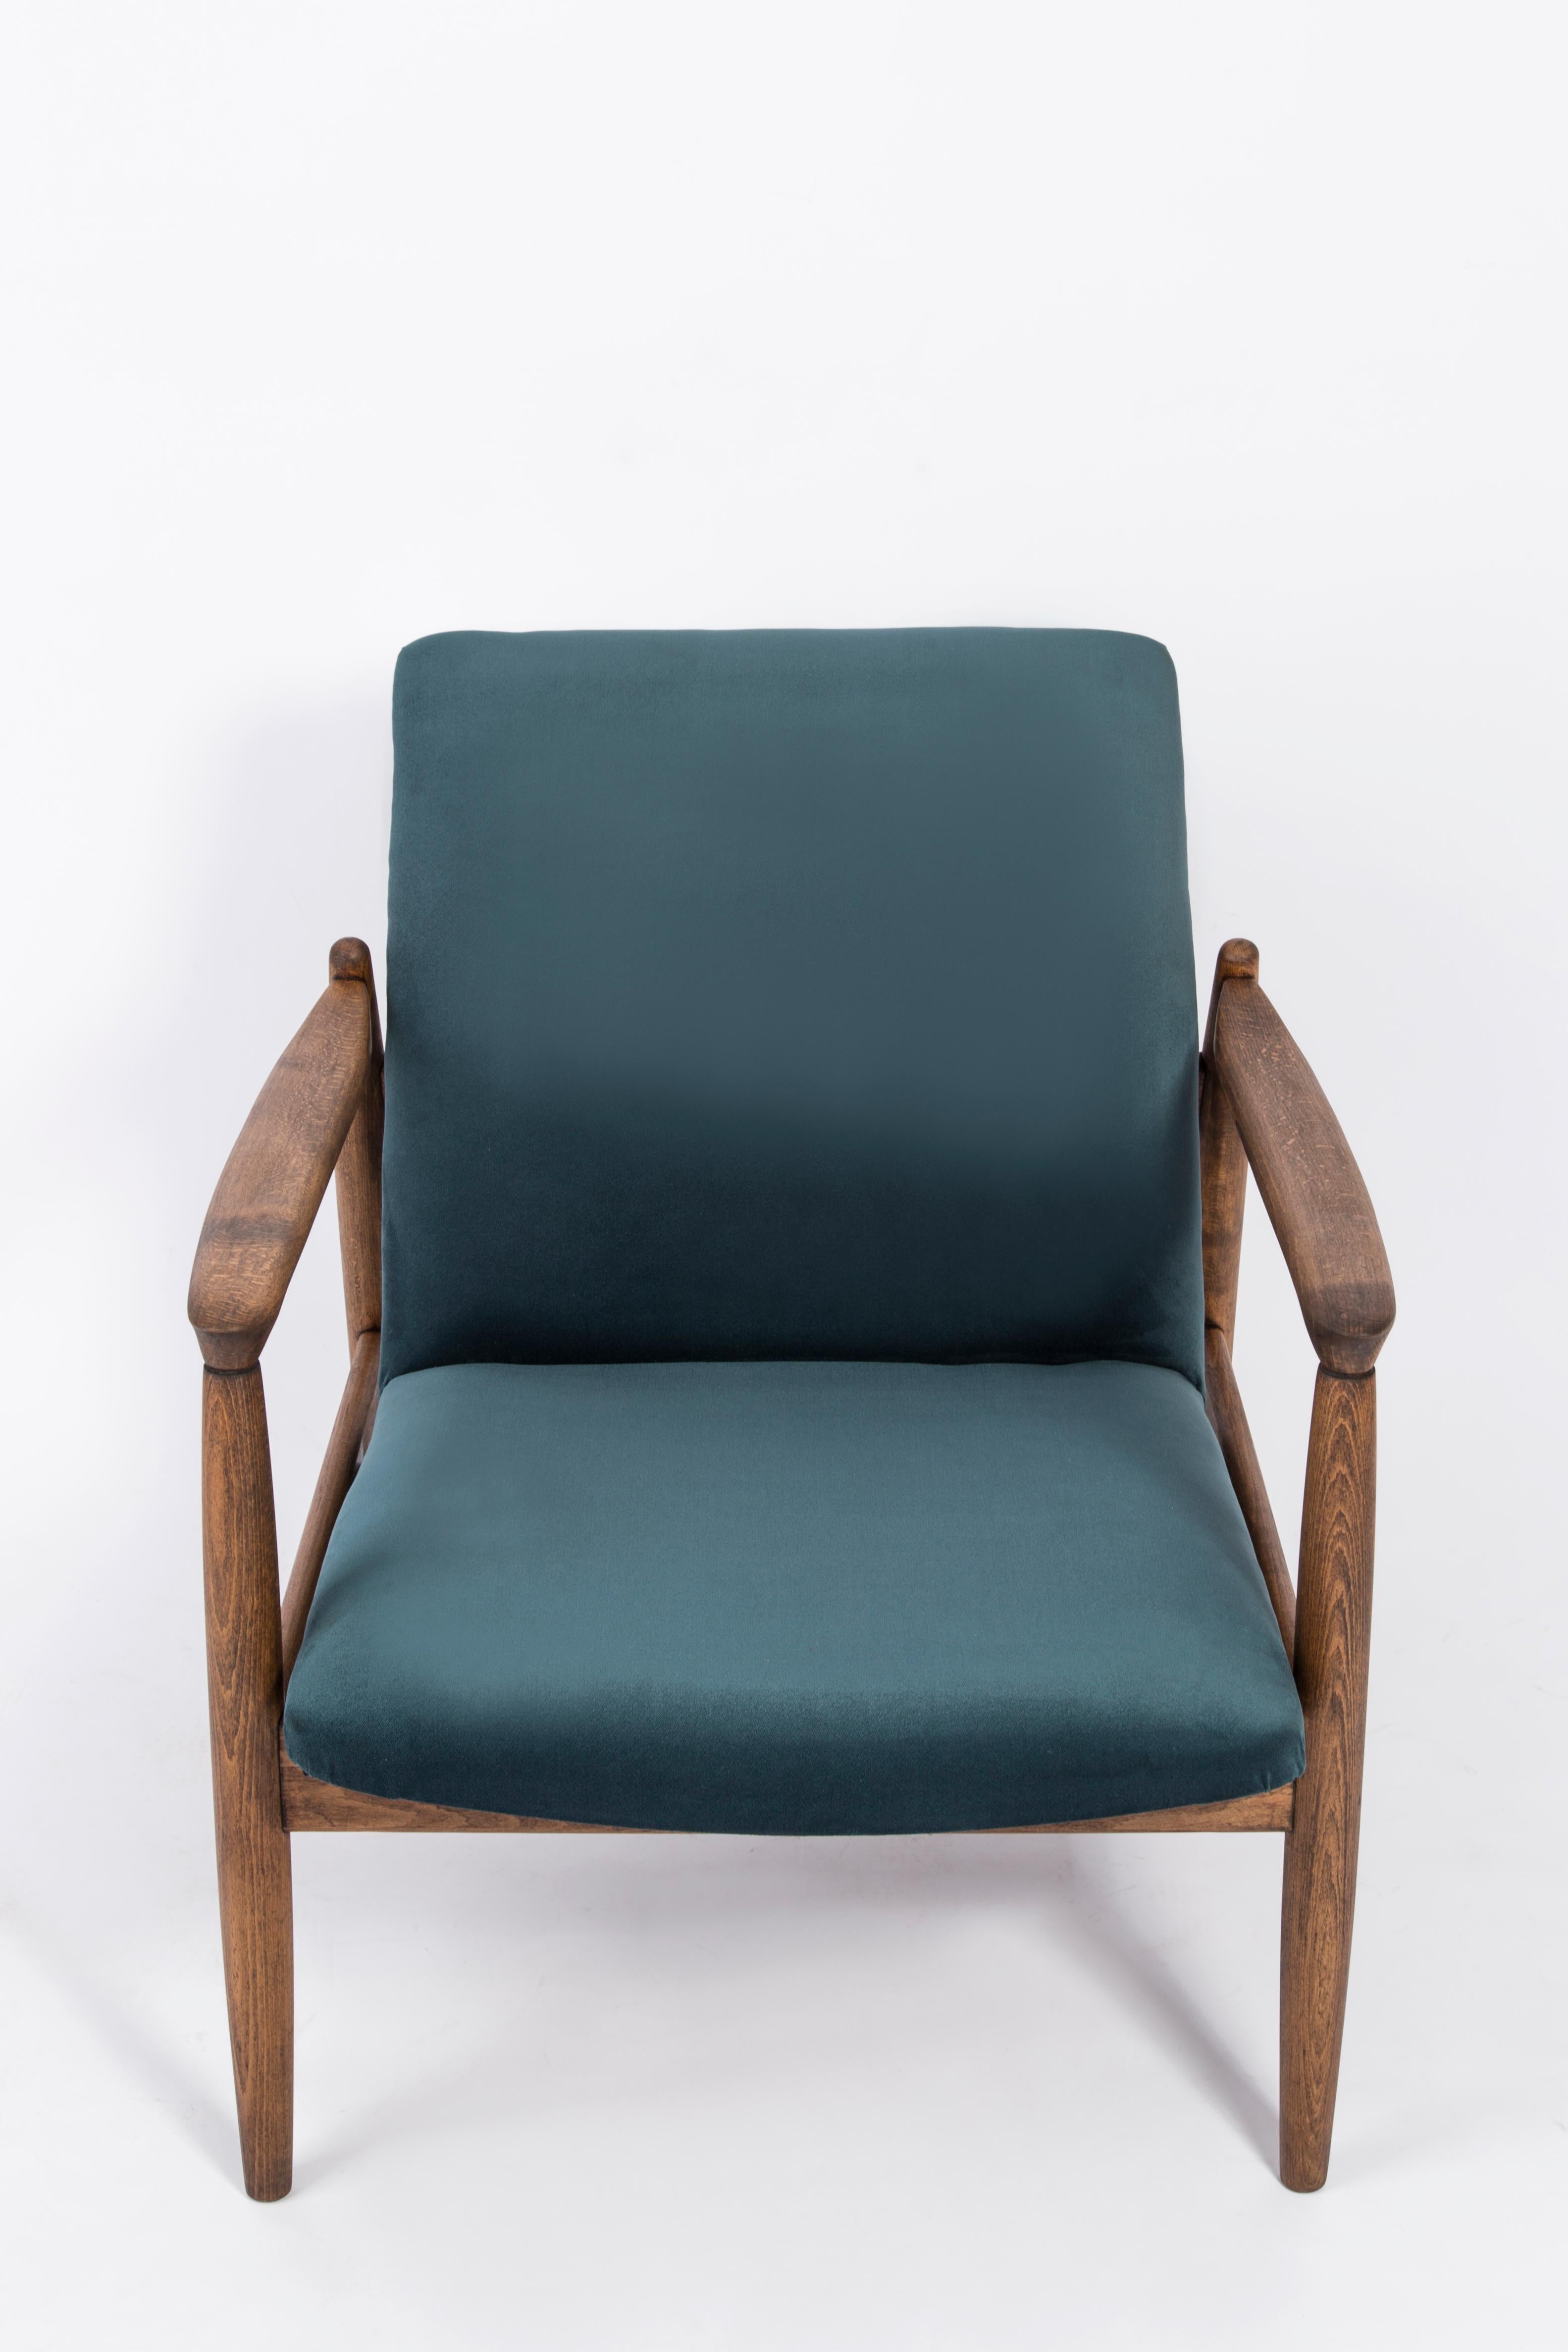 Set of Petrol Blue Vintage Armchair and Stool, Edmund Homa, 1960s In Excellent Condition For Sale In 05-080 Hornowek, PL